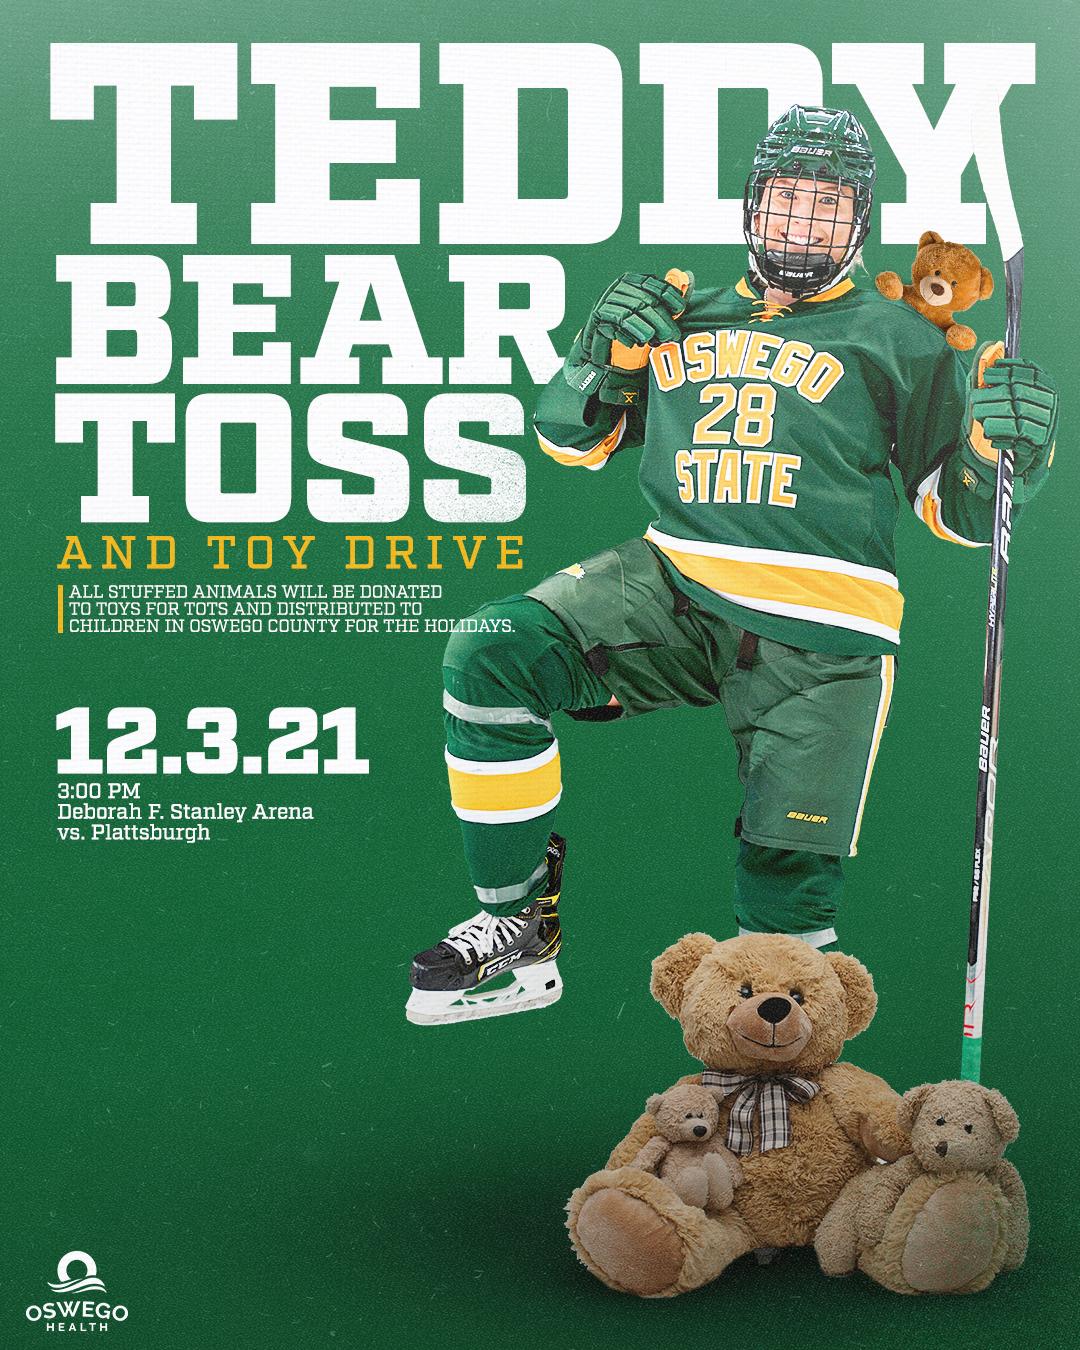 Women's hockey player standing next to stuffed bears, with event details (included here)